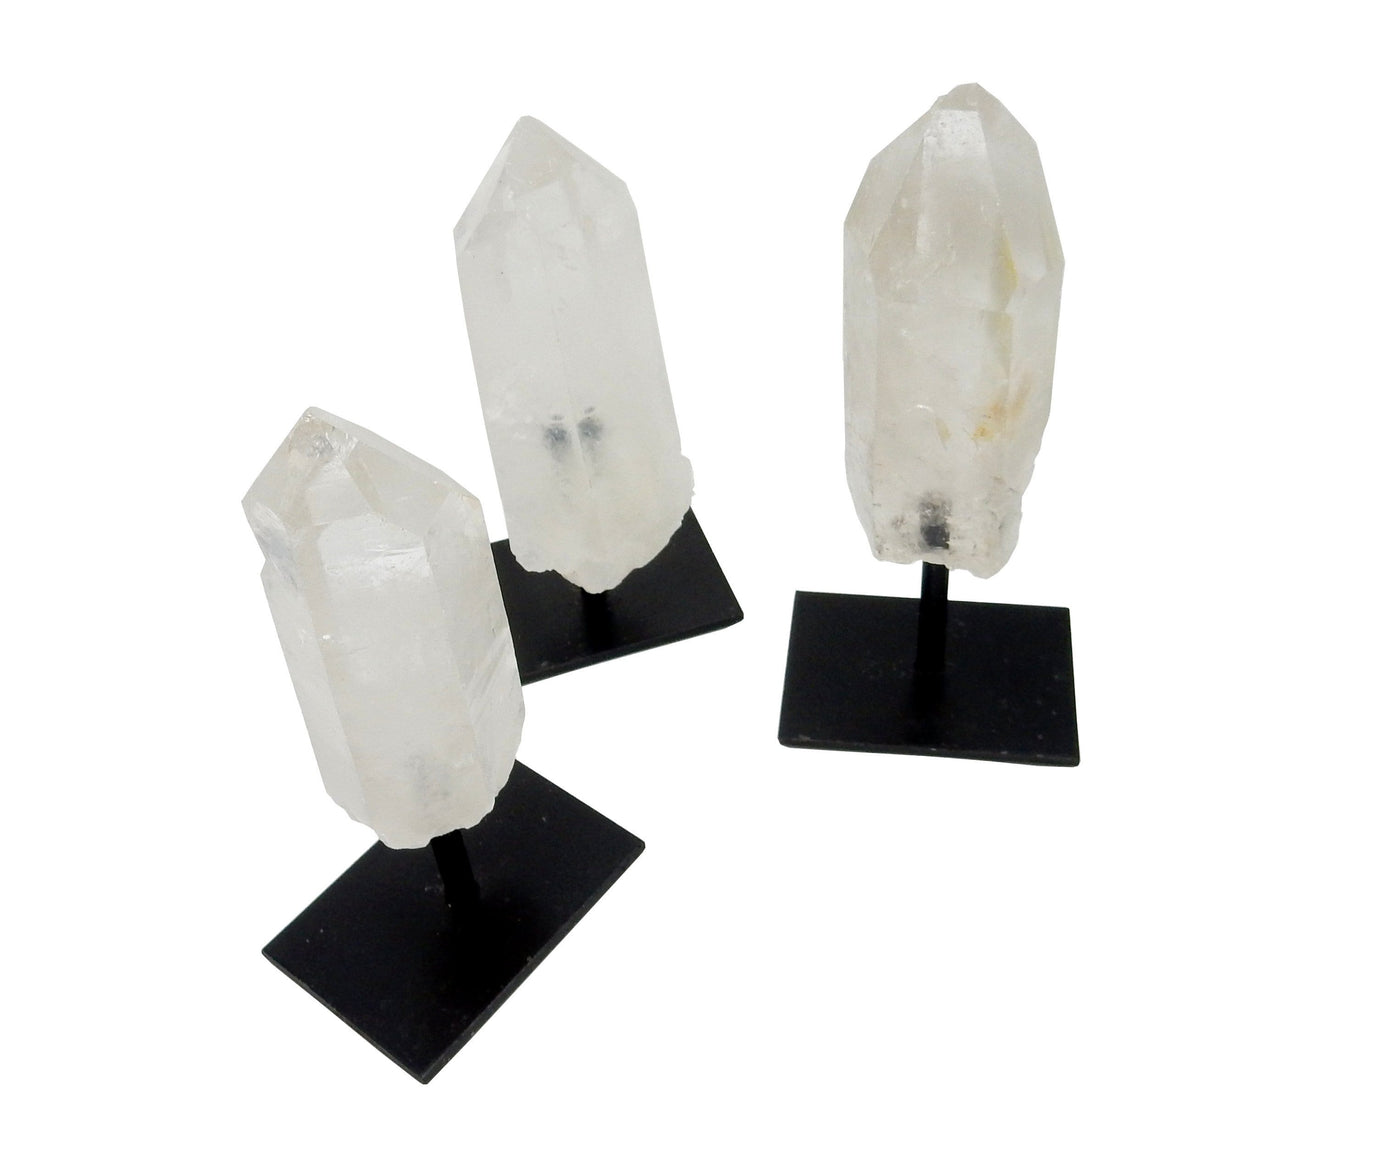 3 Crystal Quartz Point in Metal Bases on white background